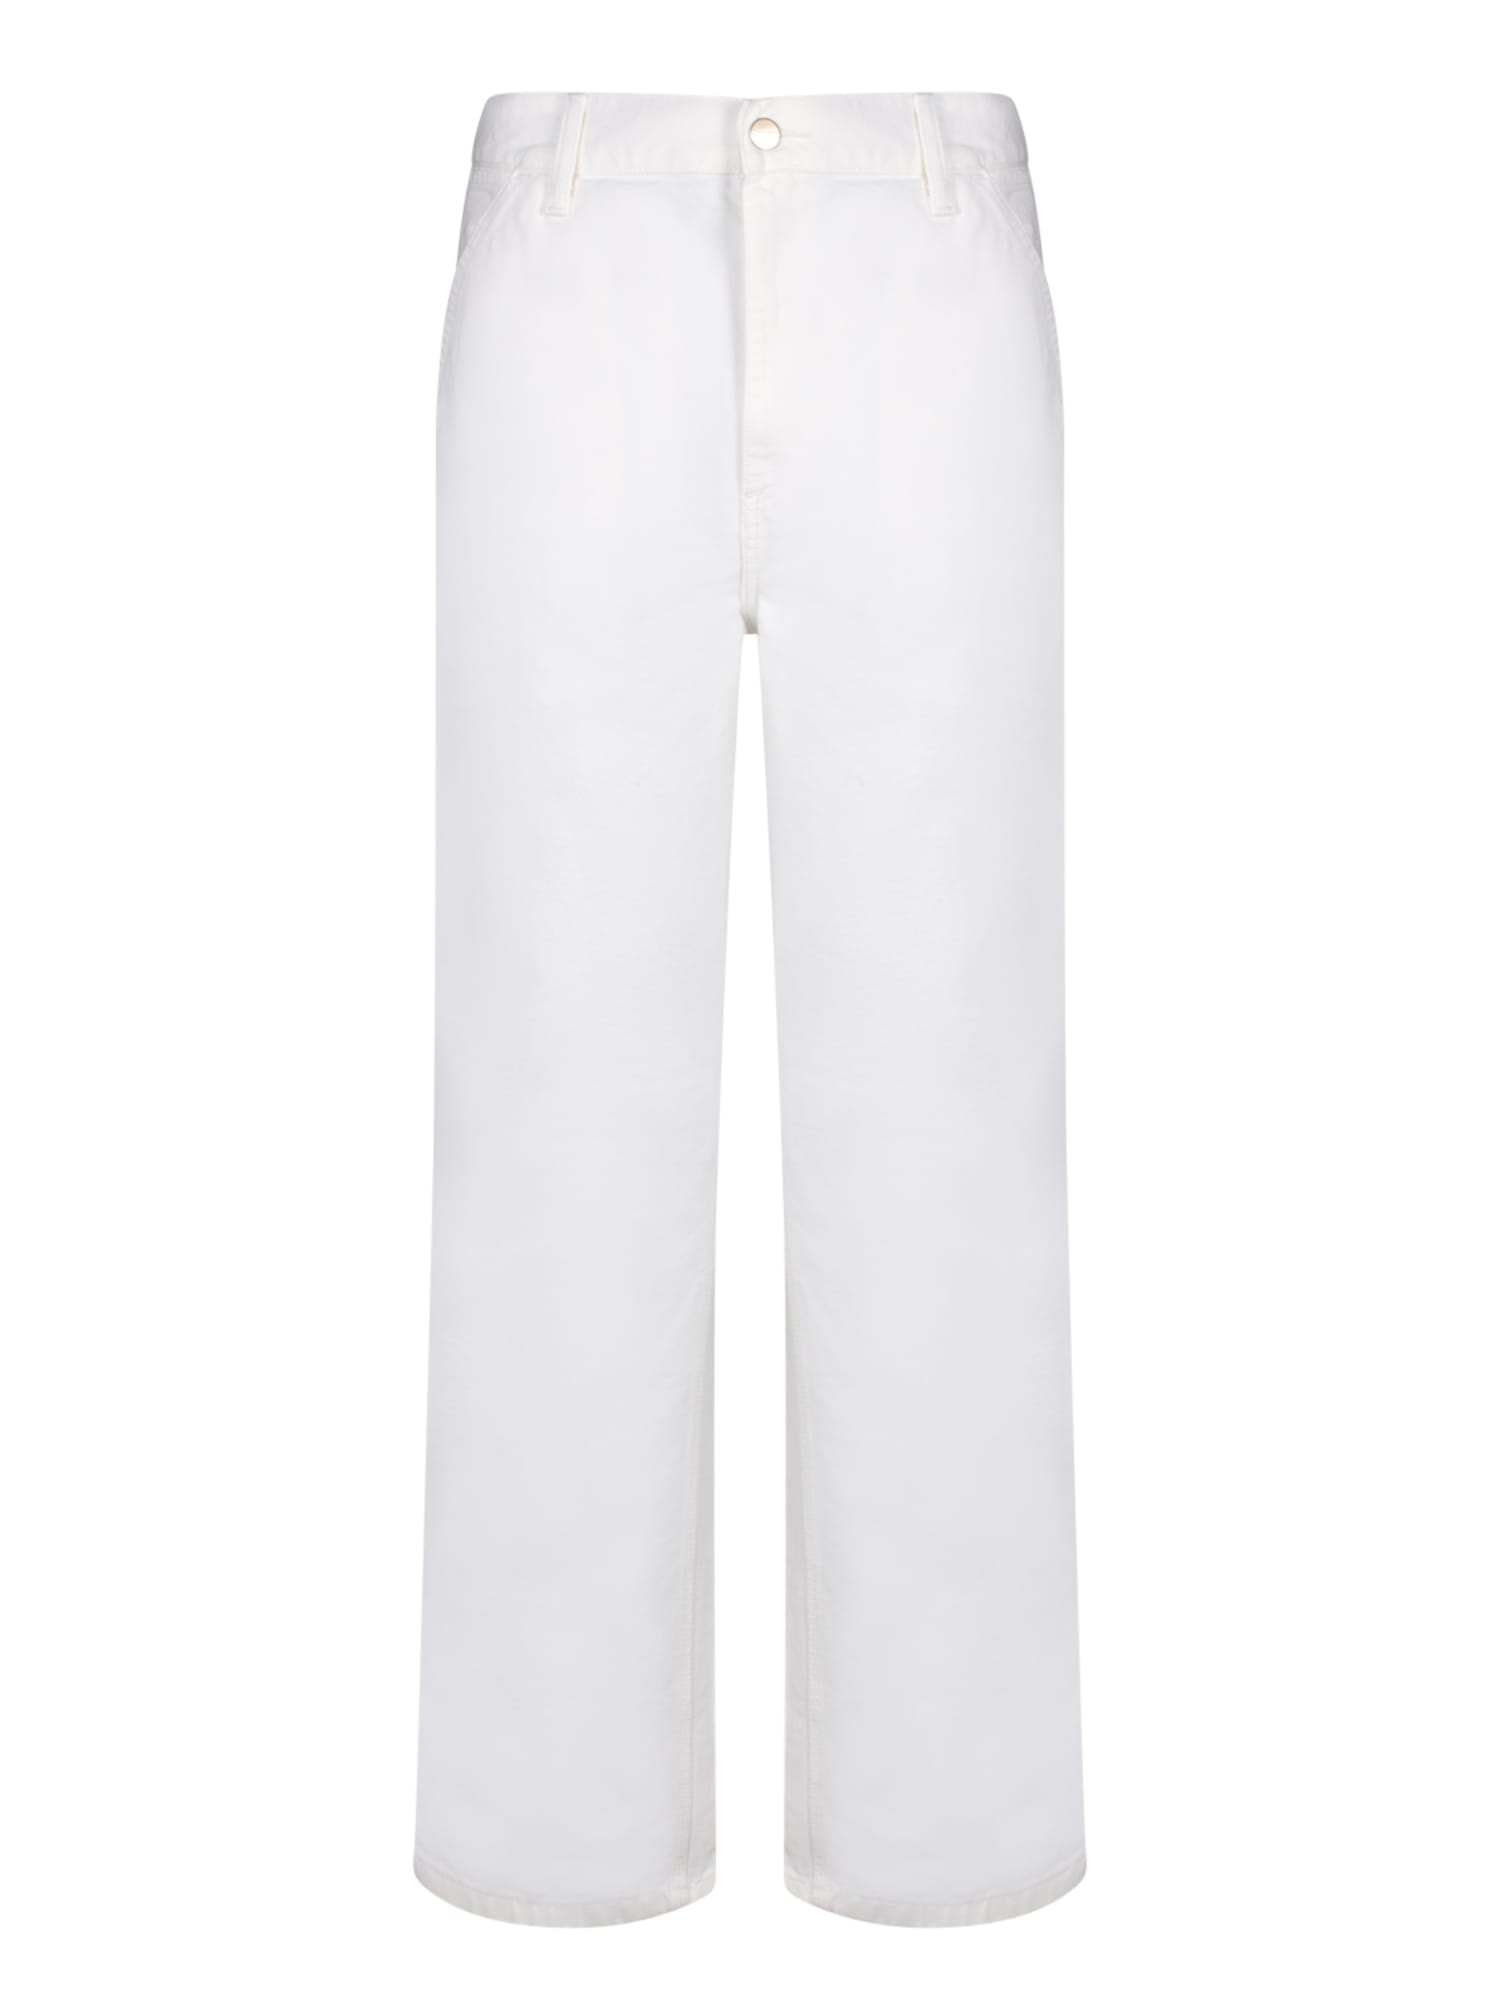 Shop Carhartt Simple White Trousers